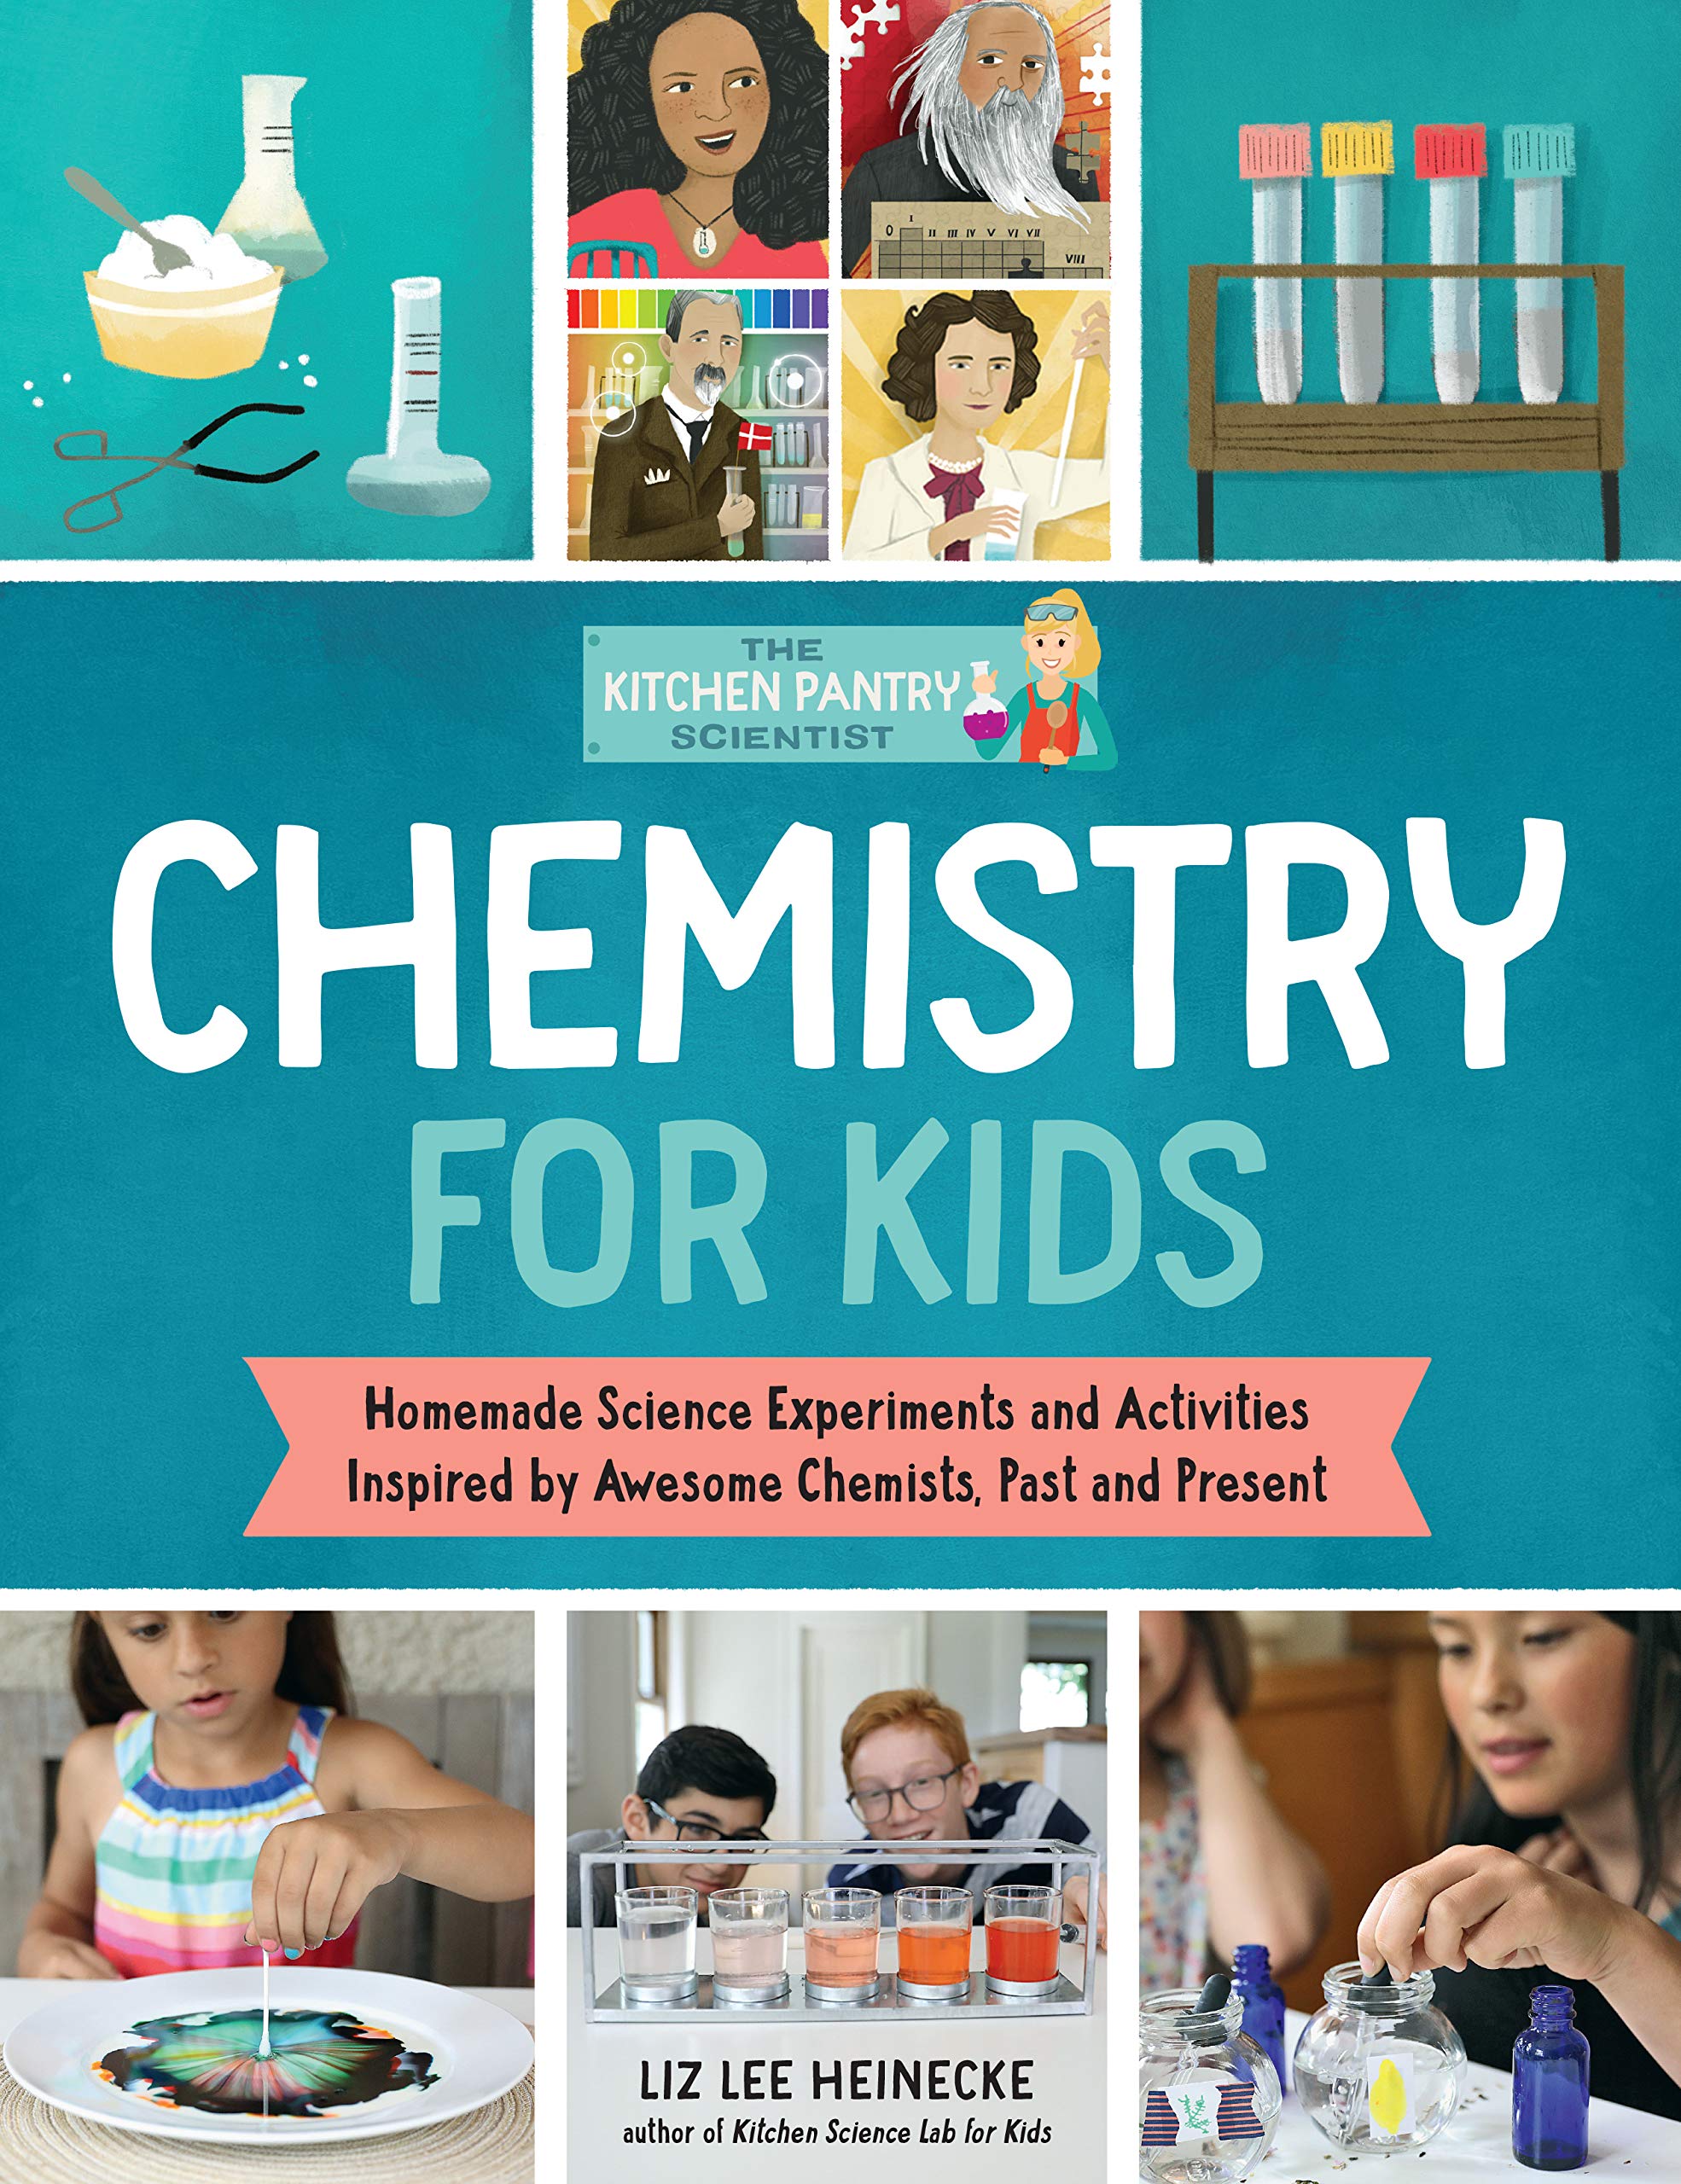 The kitchen pantry scientist chemistry for kids : homemade science experiments and activities inspired by awesome chemists, past and present